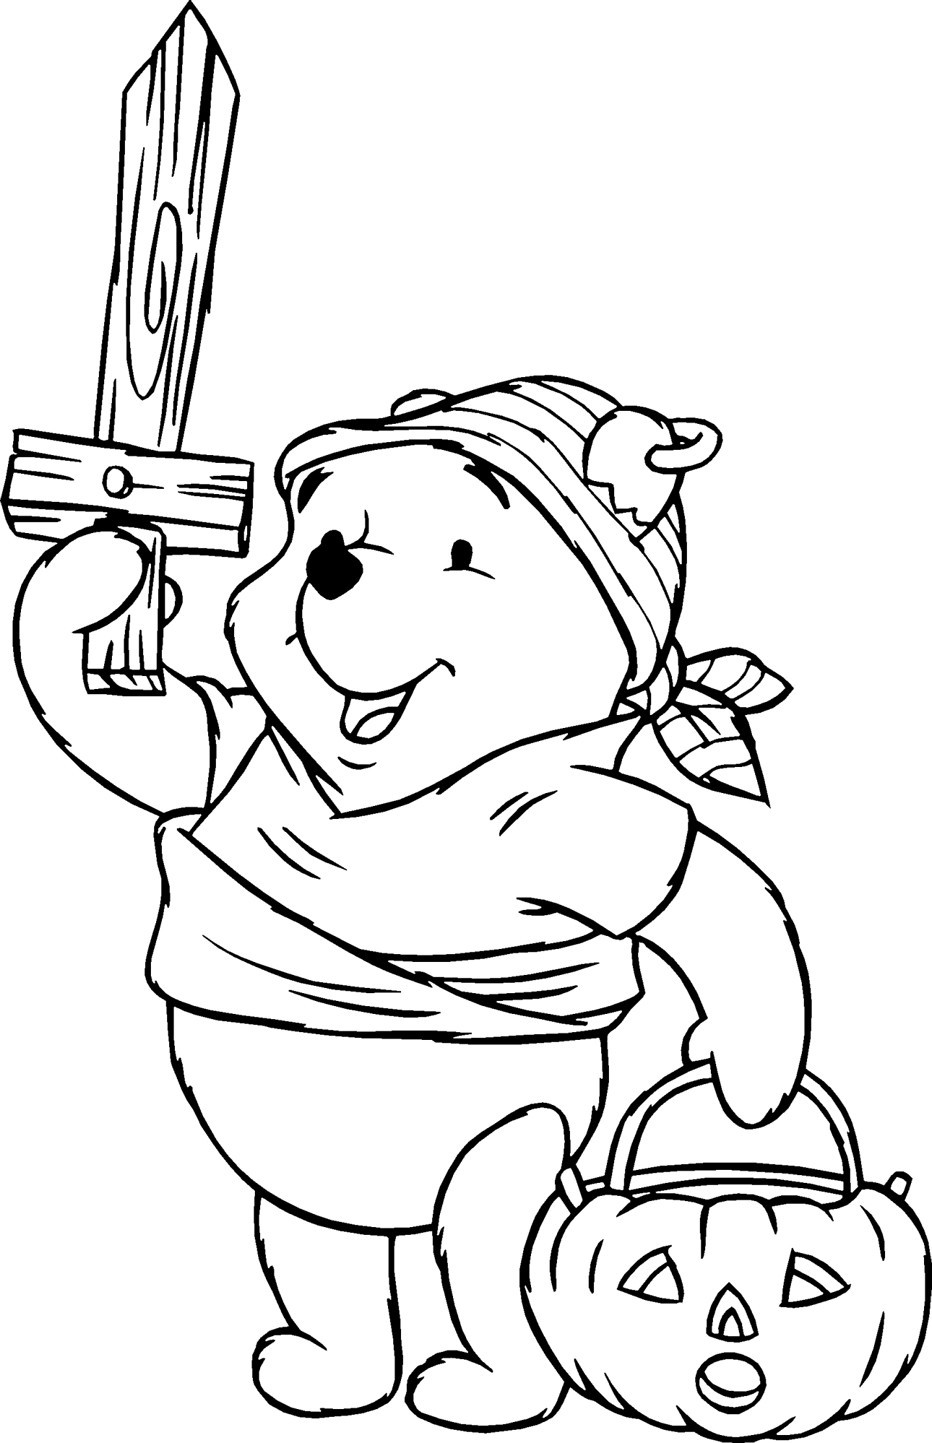 Online Coloring Pages For Toddlers
 24 Free Printable Halloween Coloring Pages for Kids